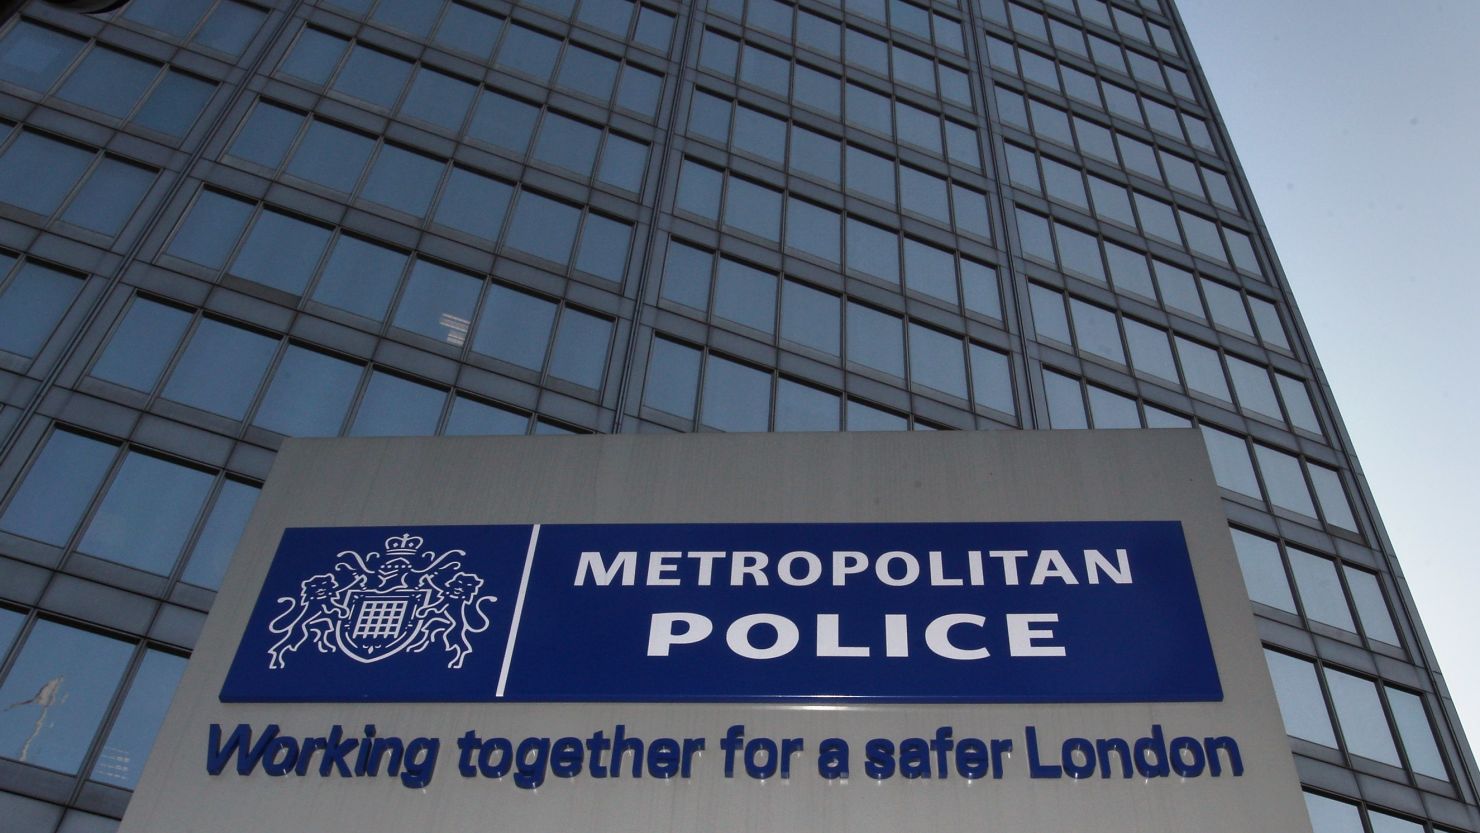 The retired officer had served in the Metropolitan Police Service's Specialist Operations command.